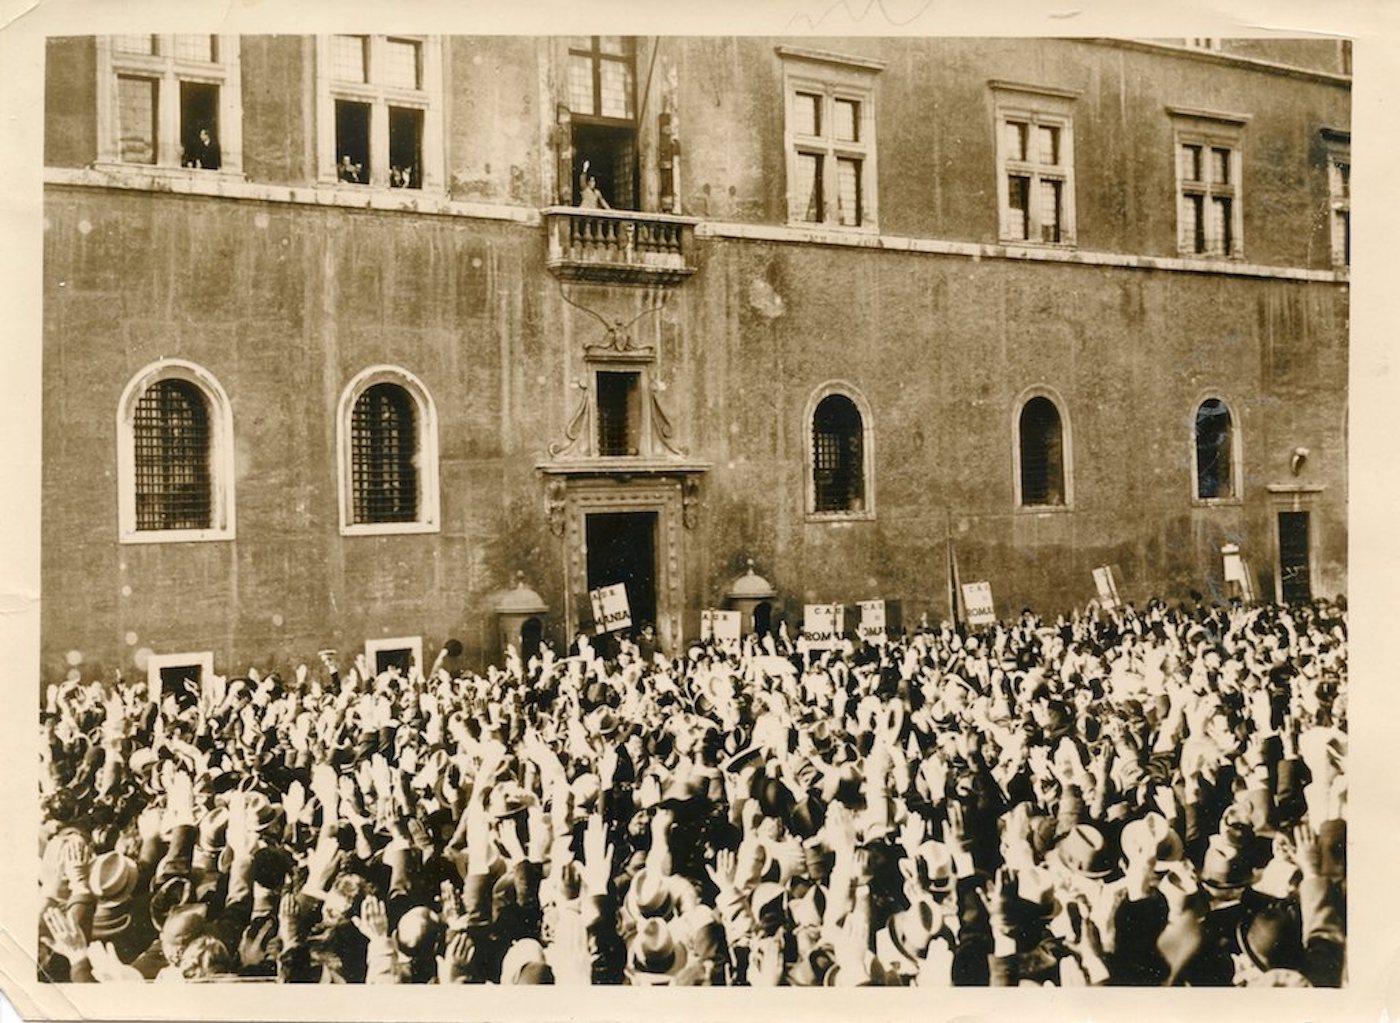 Unknown Black and White Photograph - Mussolin's Speech in Piazza Venezia - Vintage Photo 1938